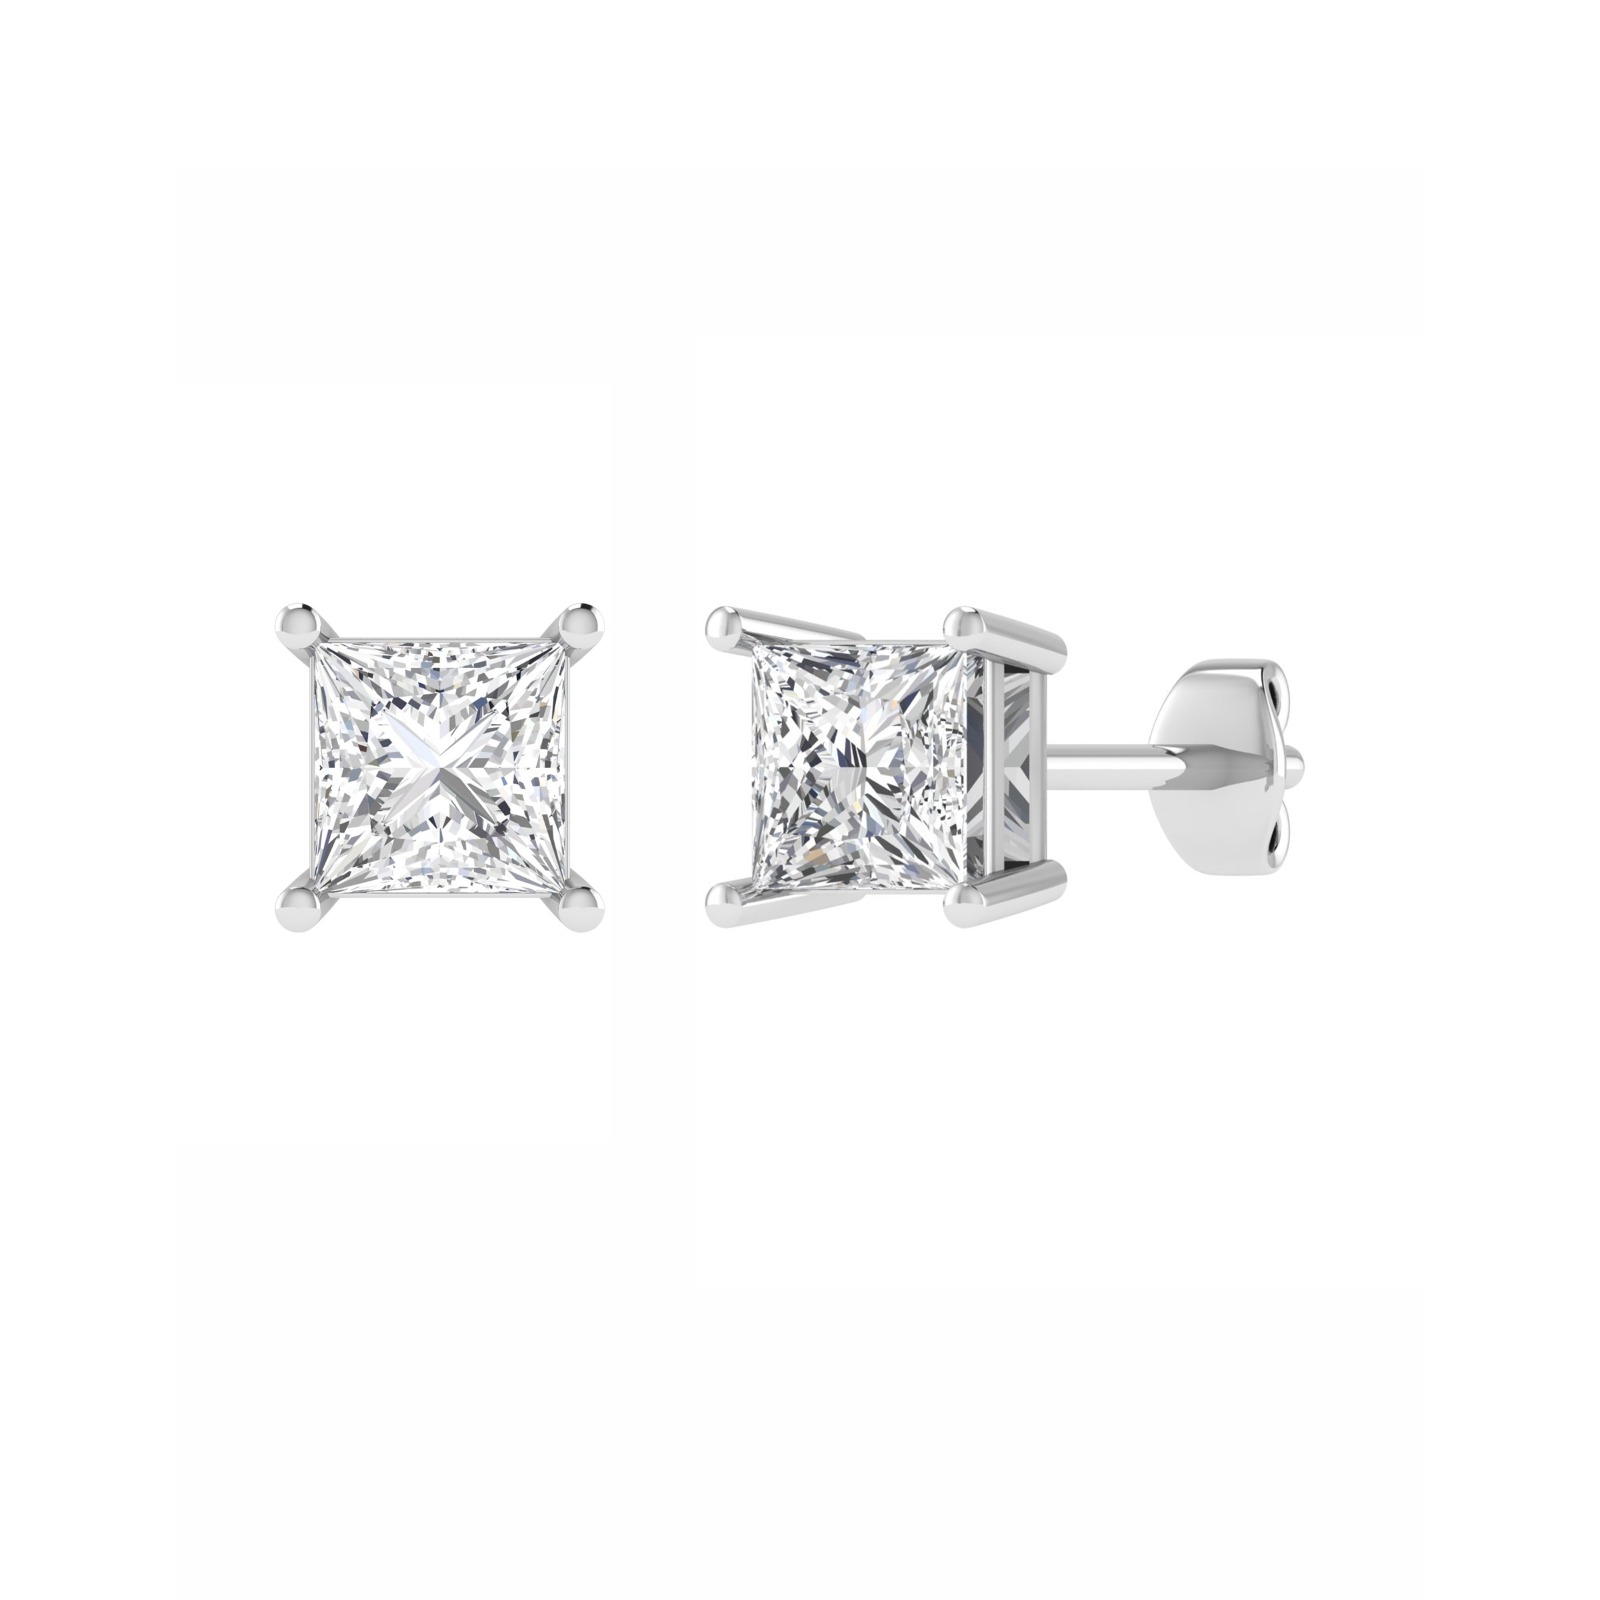 Princess Cut 4 Prong Stud Earring in Gold and Platinum